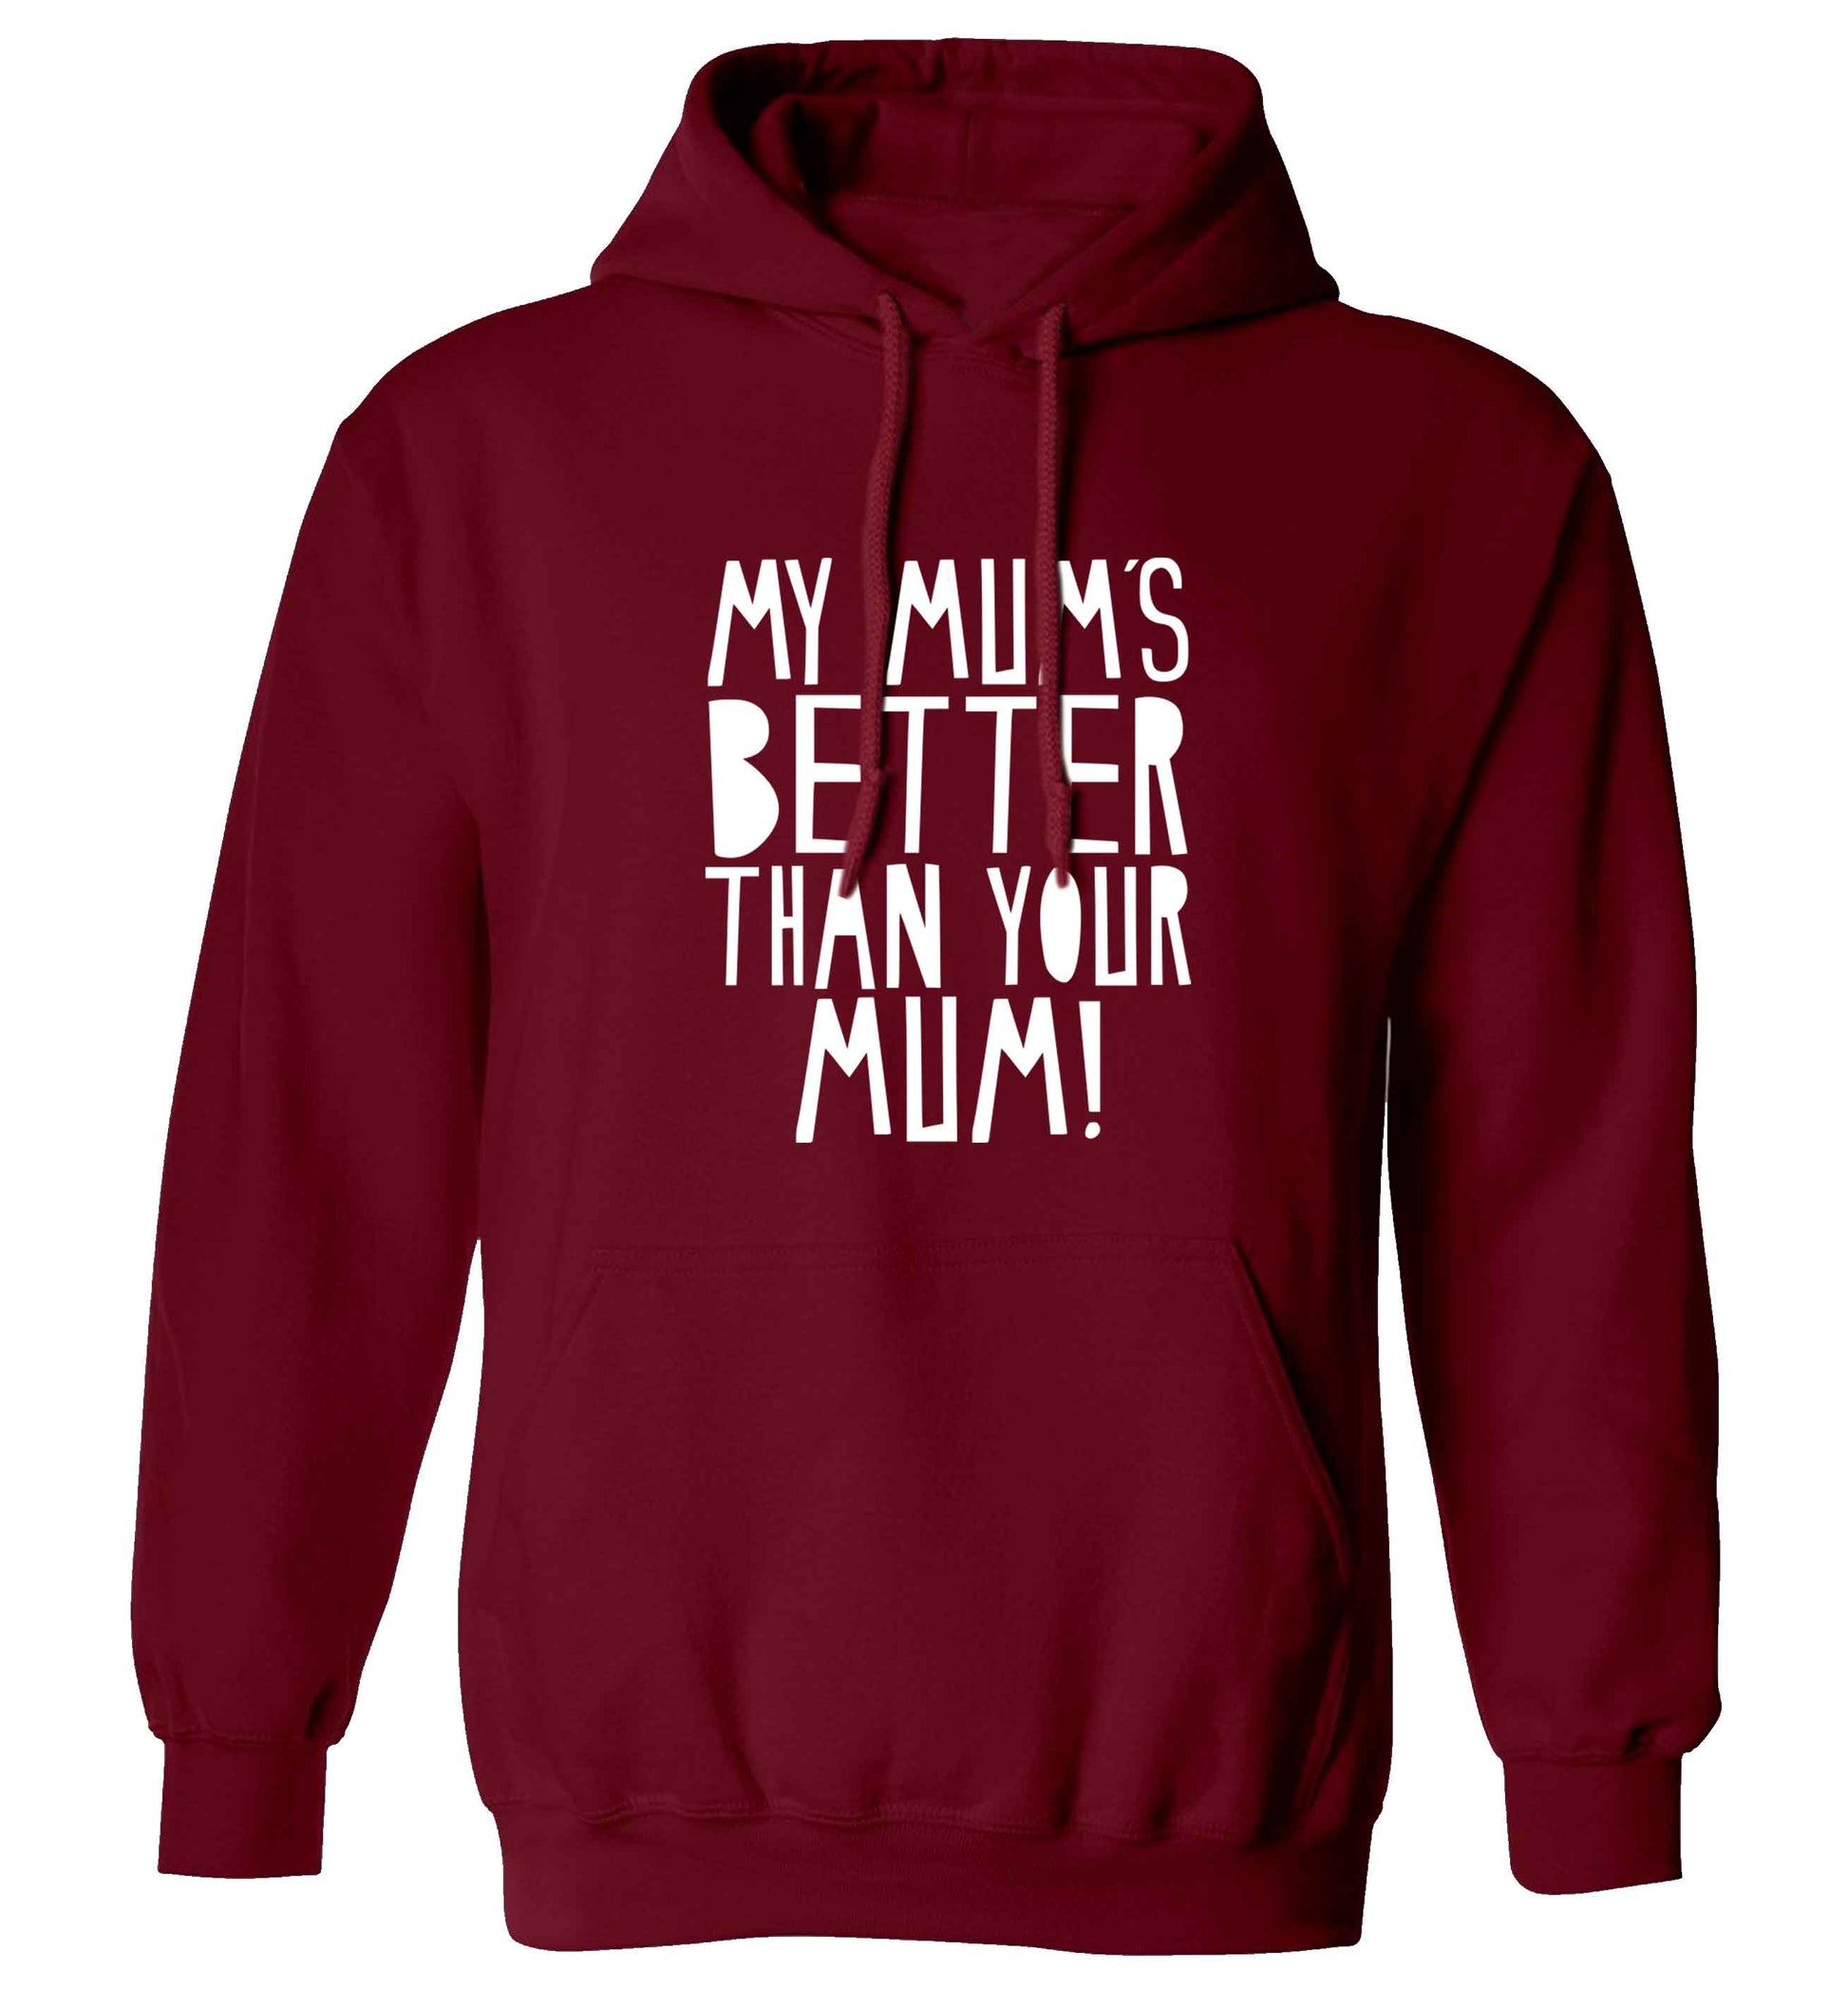 My mum's better than your mum adults unisex maroon hoodie 2XL